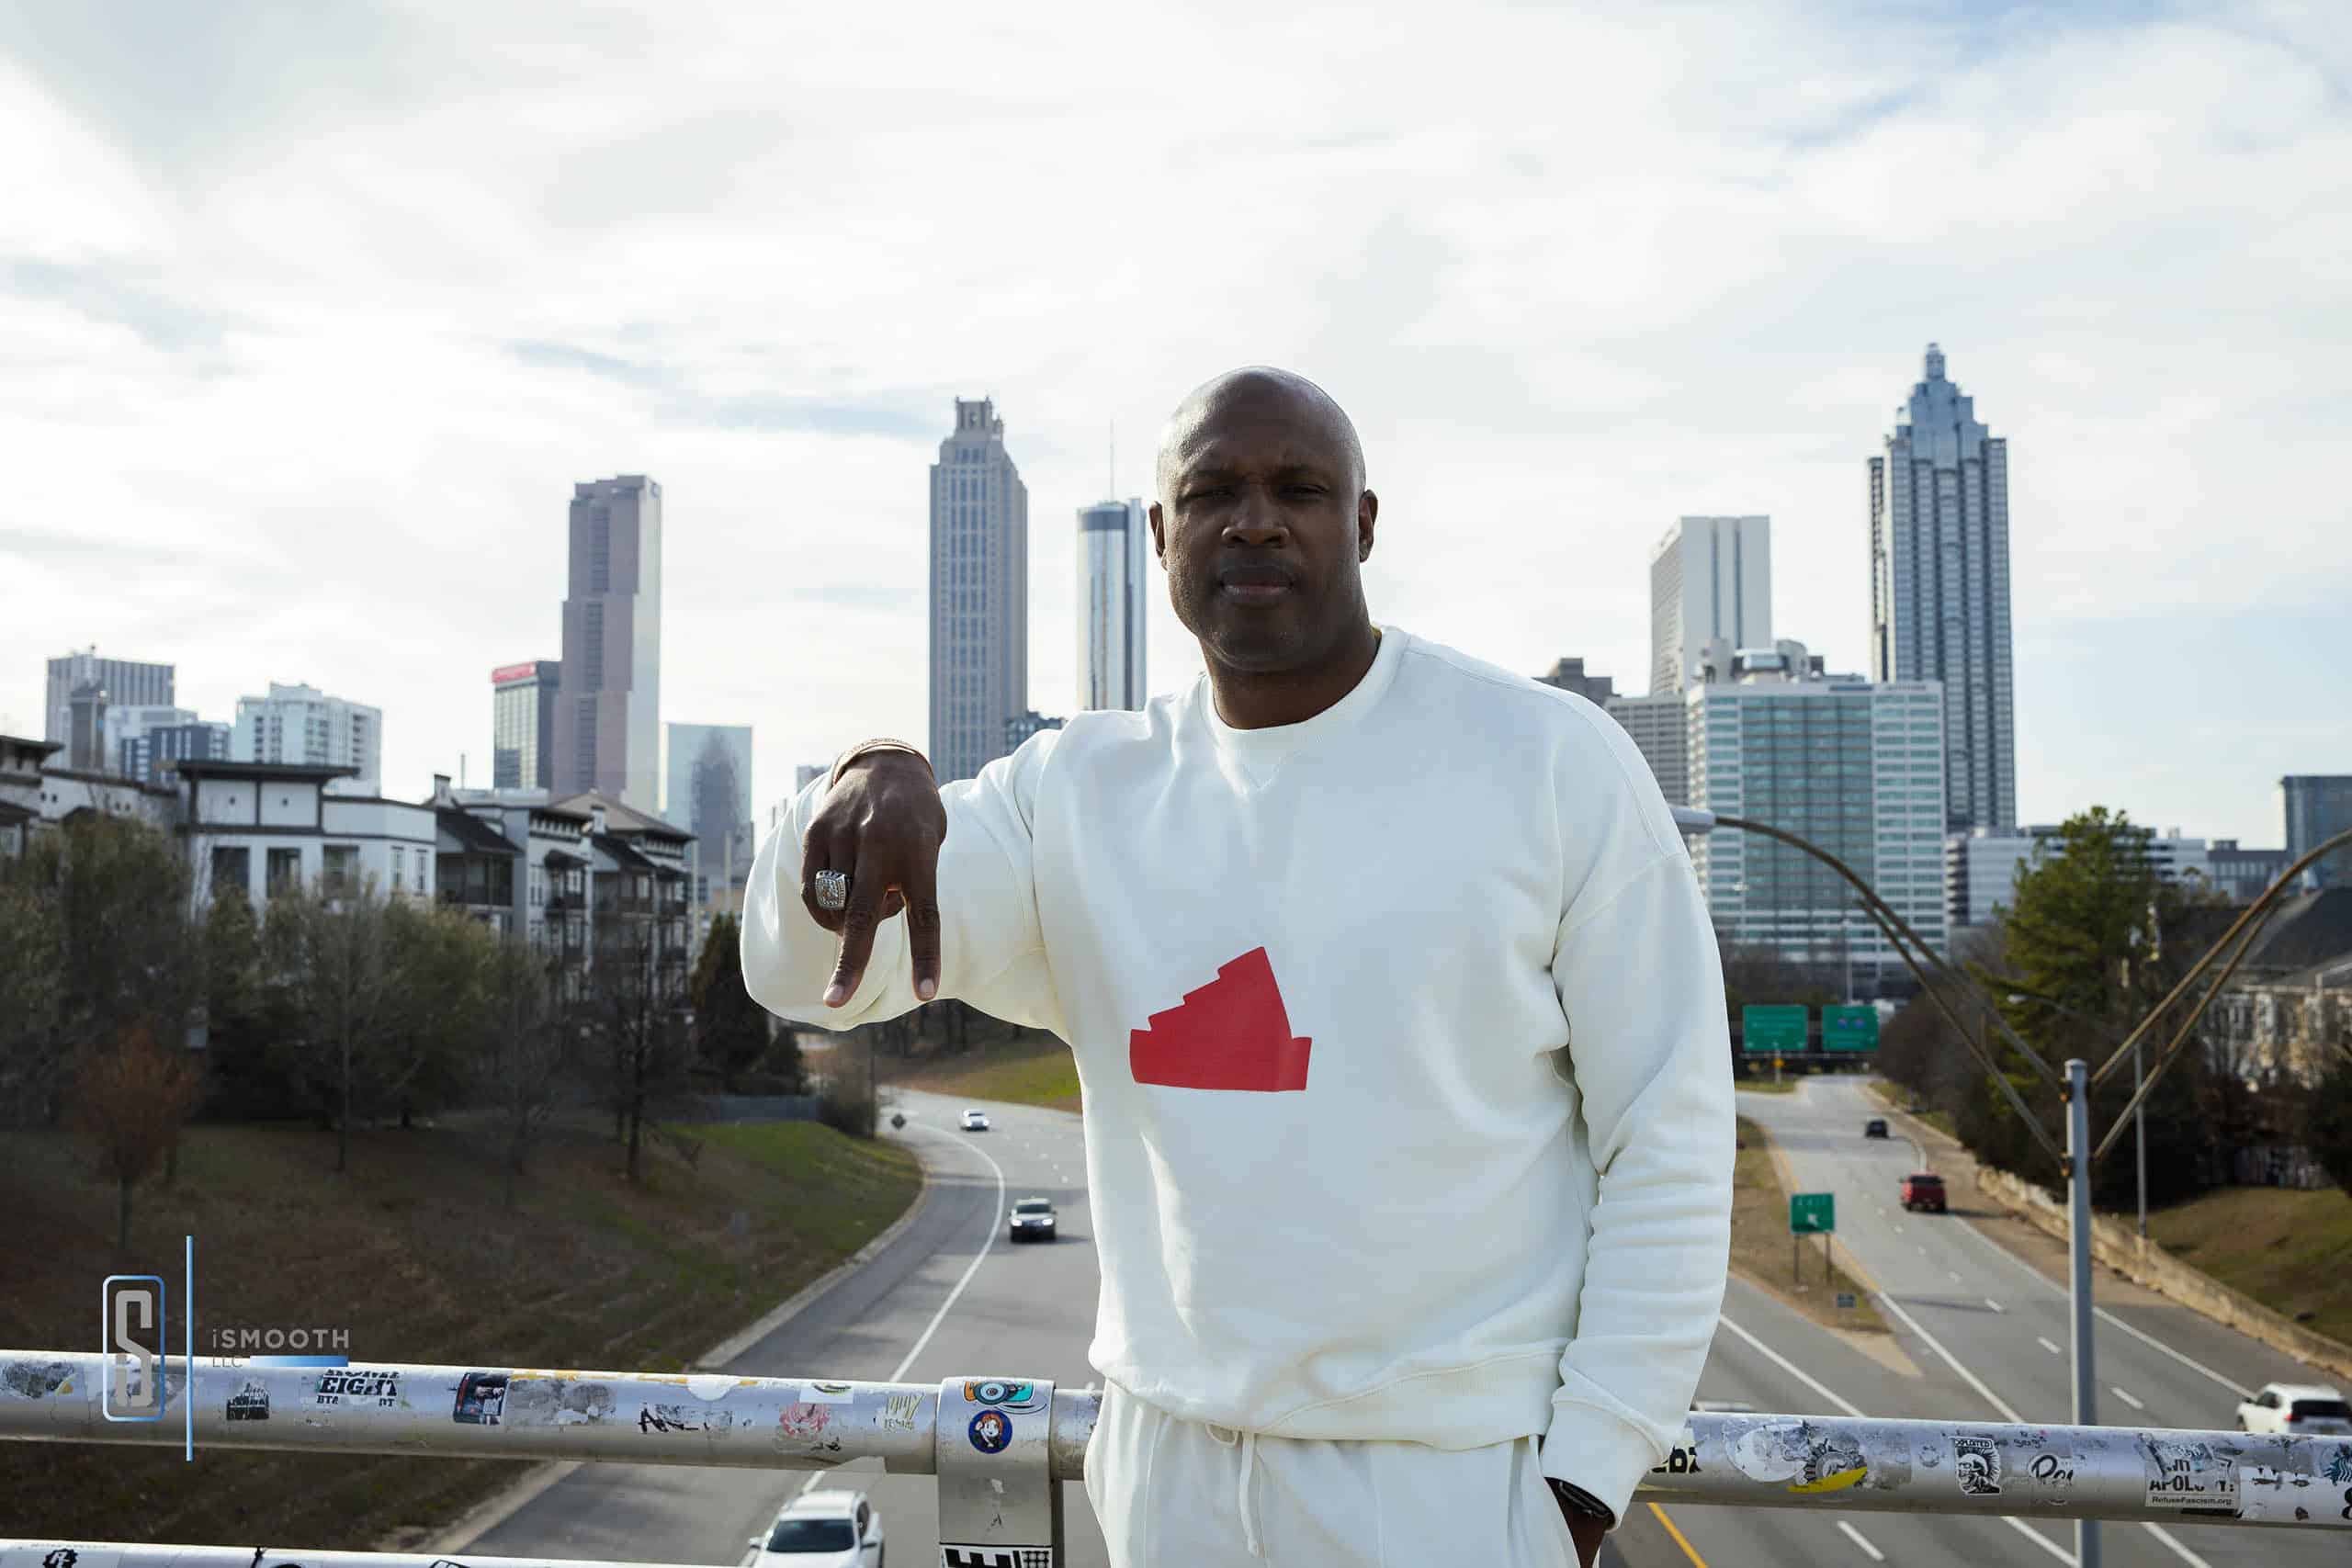 Photograph of CJ in Atlanta taken by iSmooth